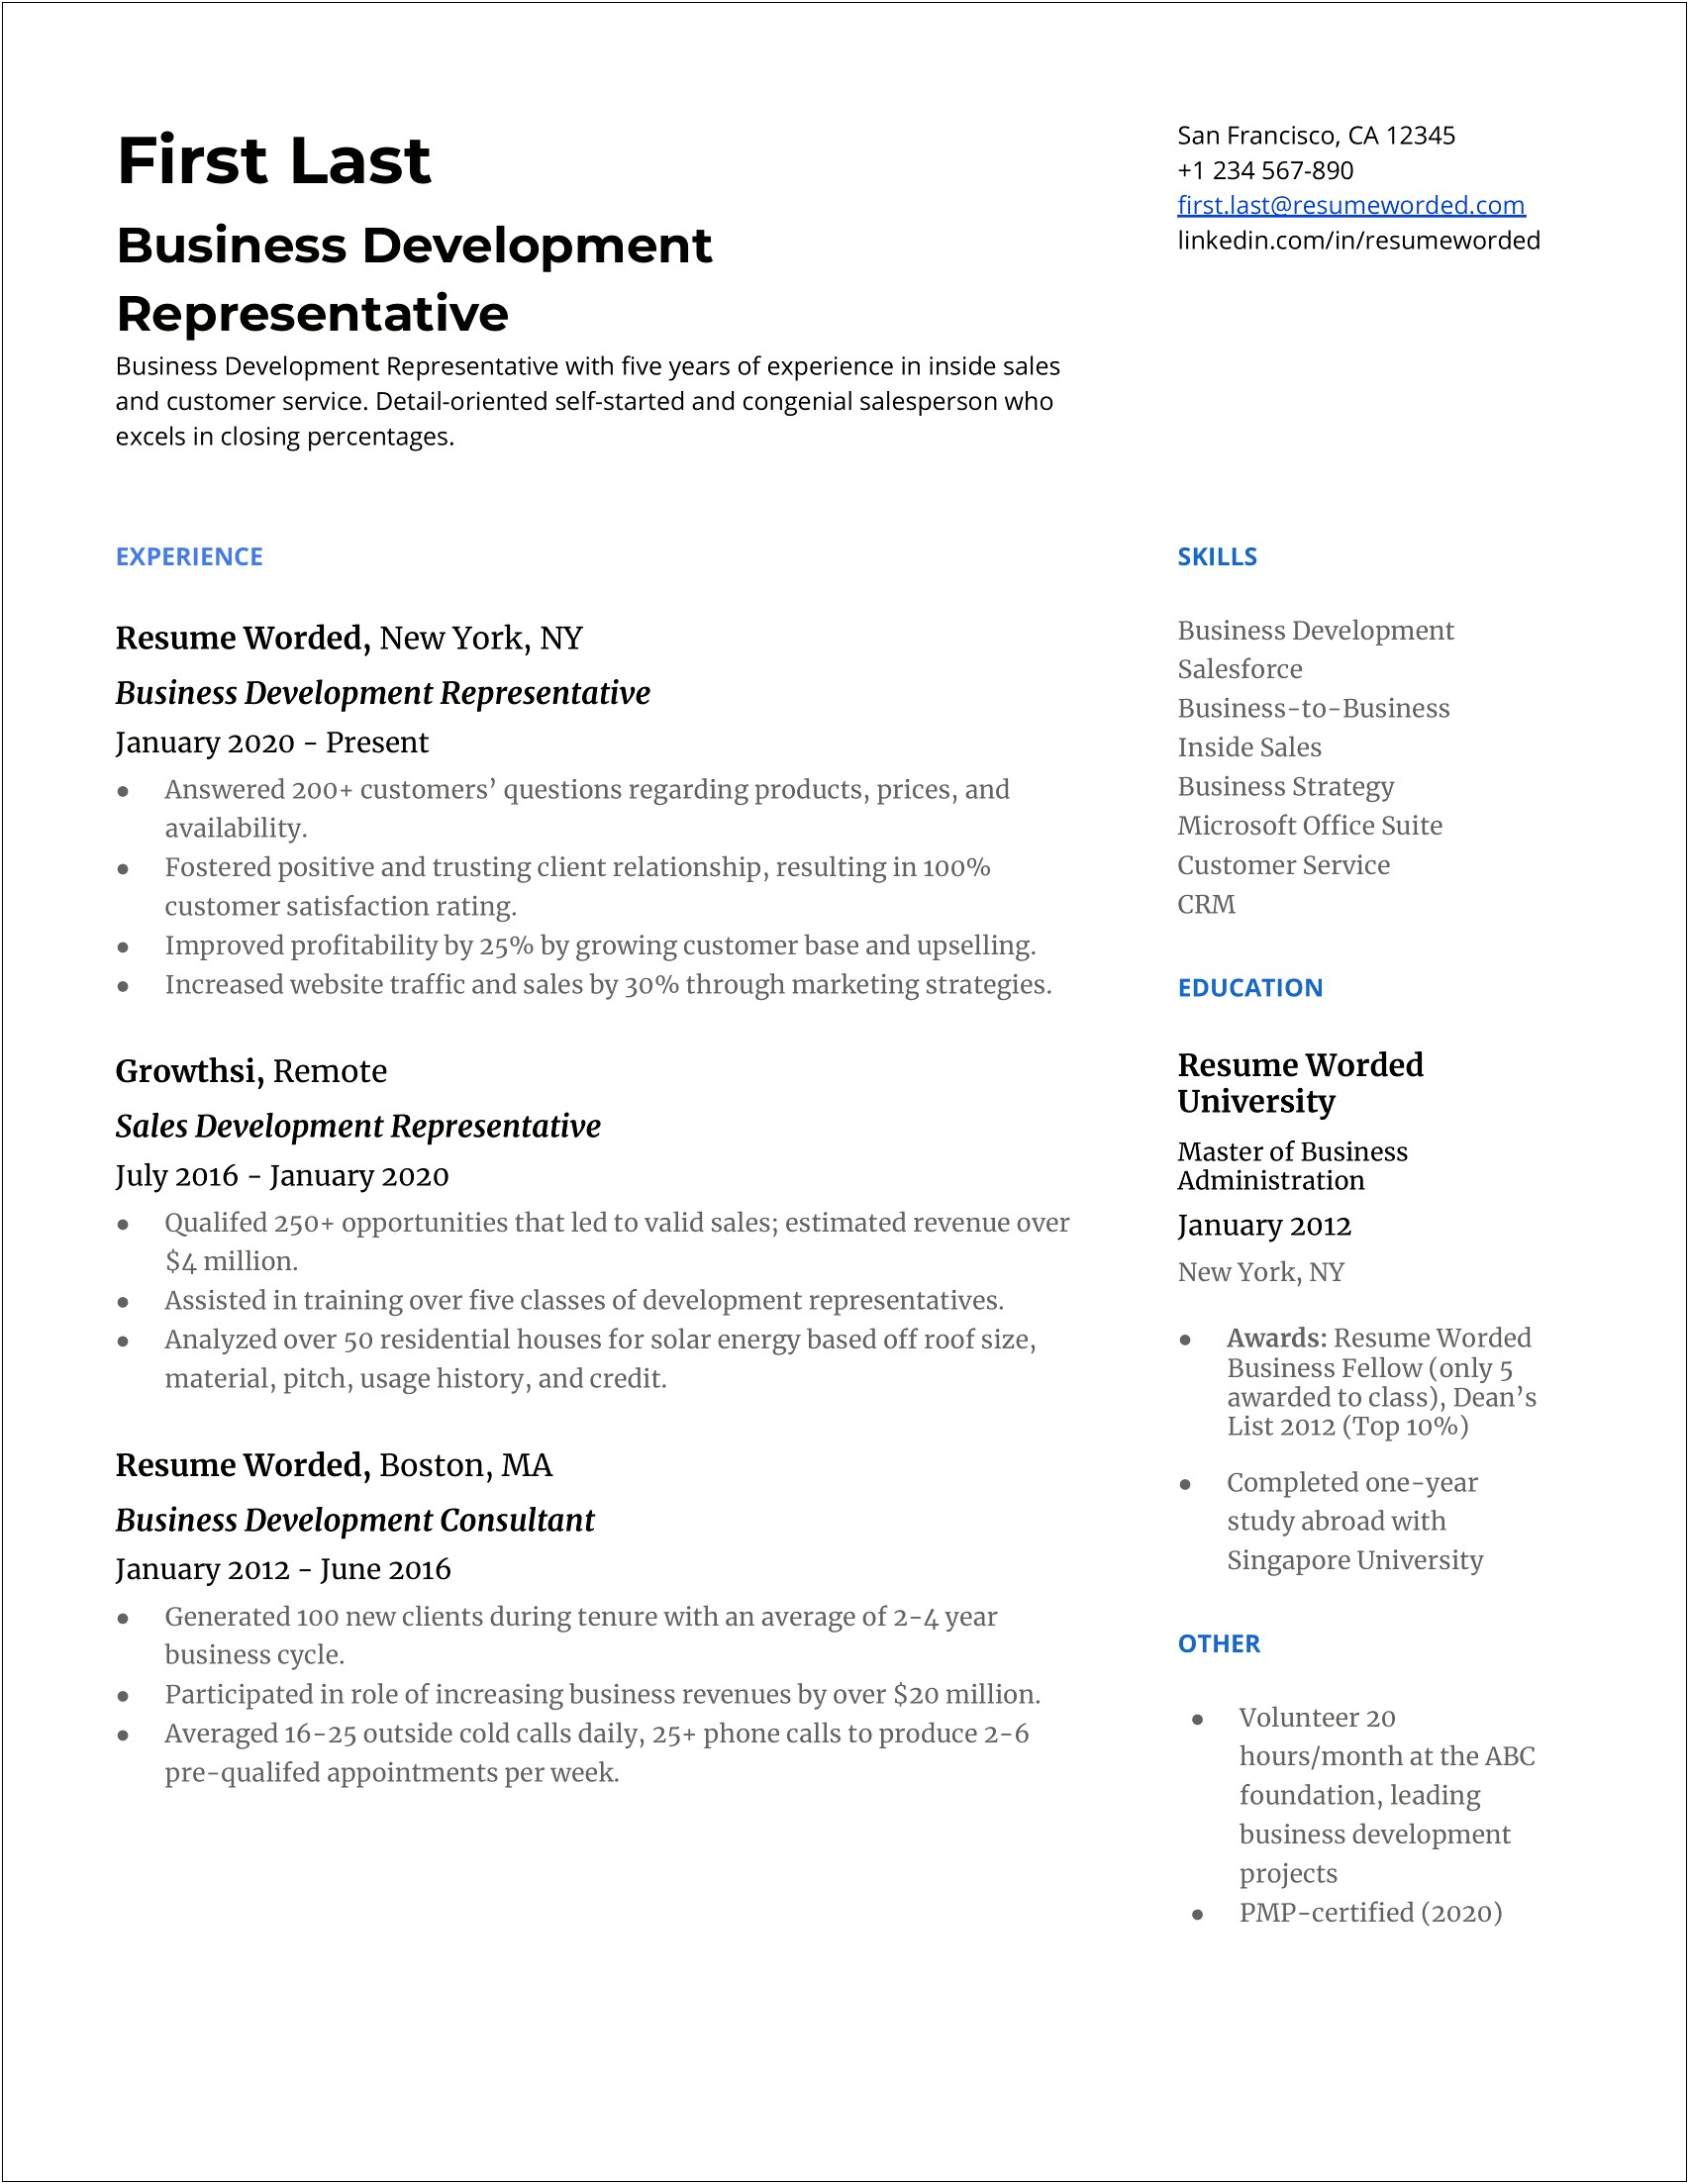 Resume Objective For Varied Experience